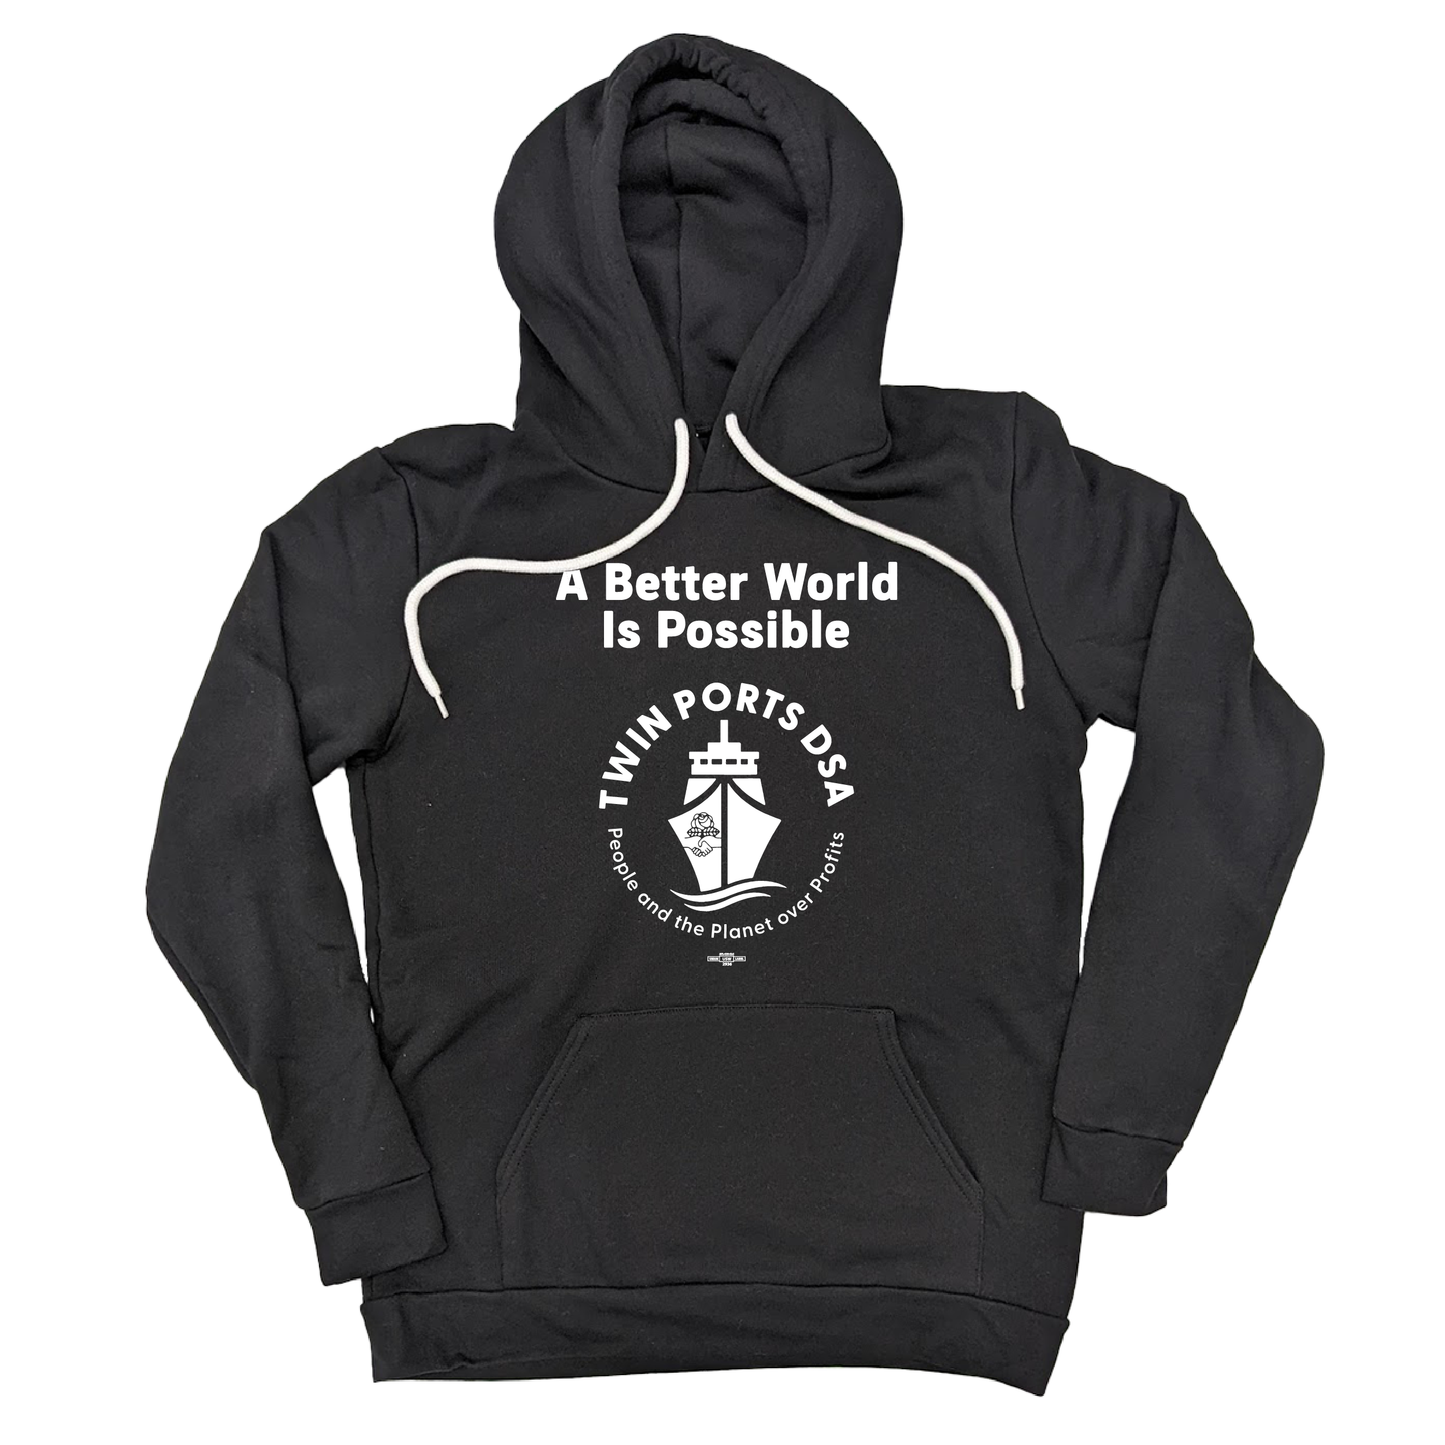 A Better World is Possible Pullover Hoodie